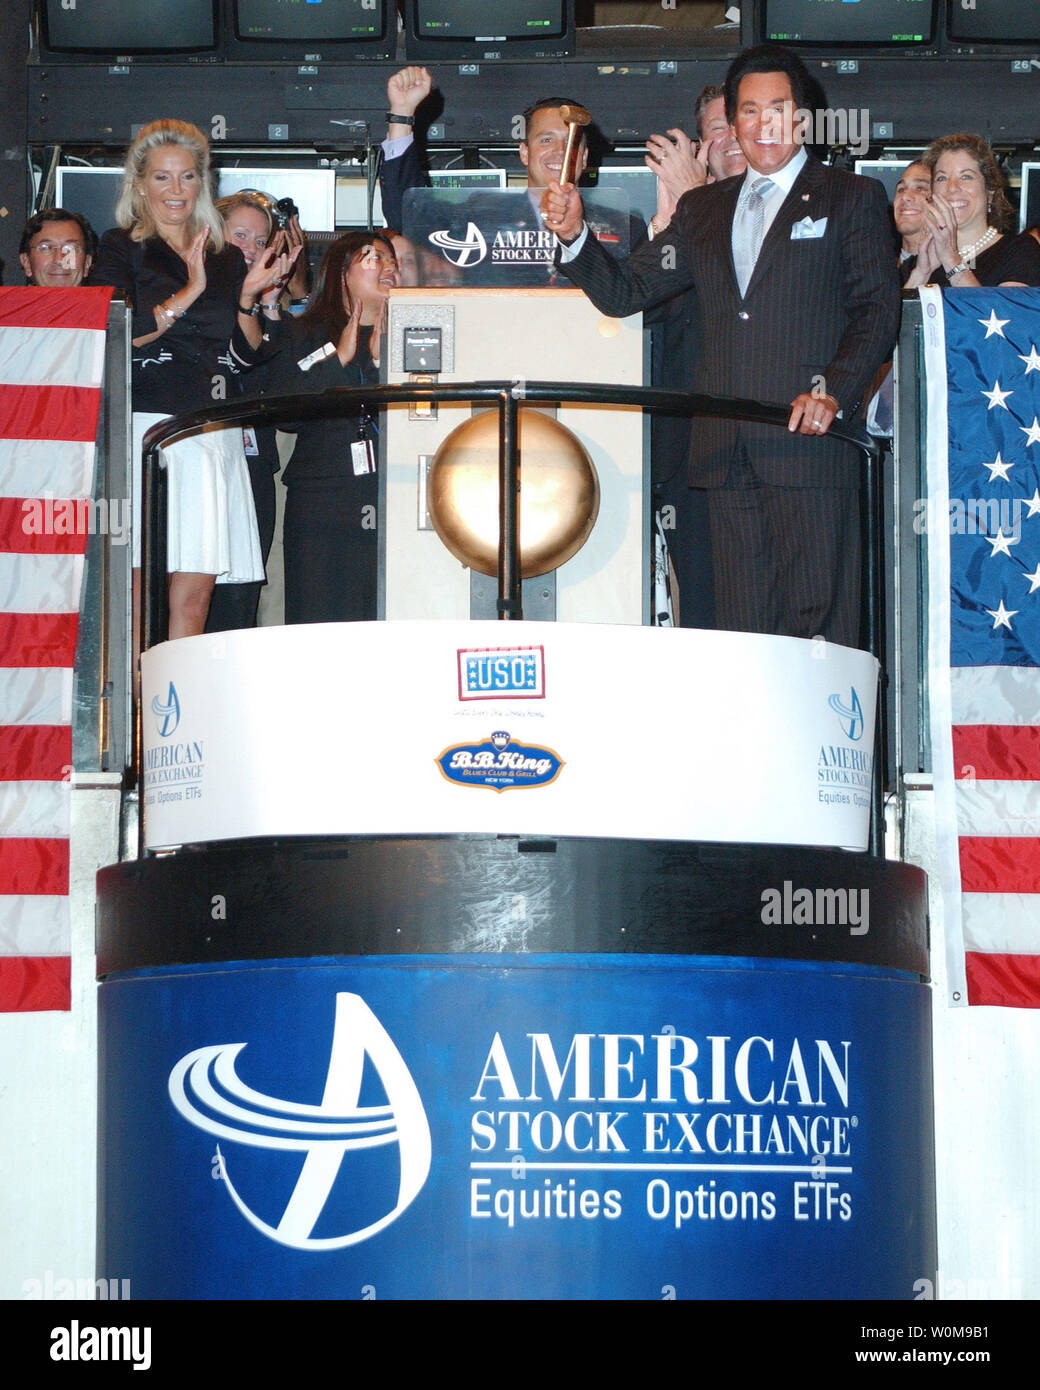 Wayne Newton, Mr. Las Vegas, rang the opening bell at the American Stock Exchange in New York City on July 27, 2006. Newton, who serves as Chairman of the USO Celebrity Circle, rang the bell in recognition of the USO's 65th birthday and was honored for his tireless involvement with their organization. Tickets to Wayne Newton's one night appearance at BB Kings Grill were raffled off at the Exchange and the proceeds were donated to the USO. (UPI Photo/Alan Rosenberg) Stock Photo